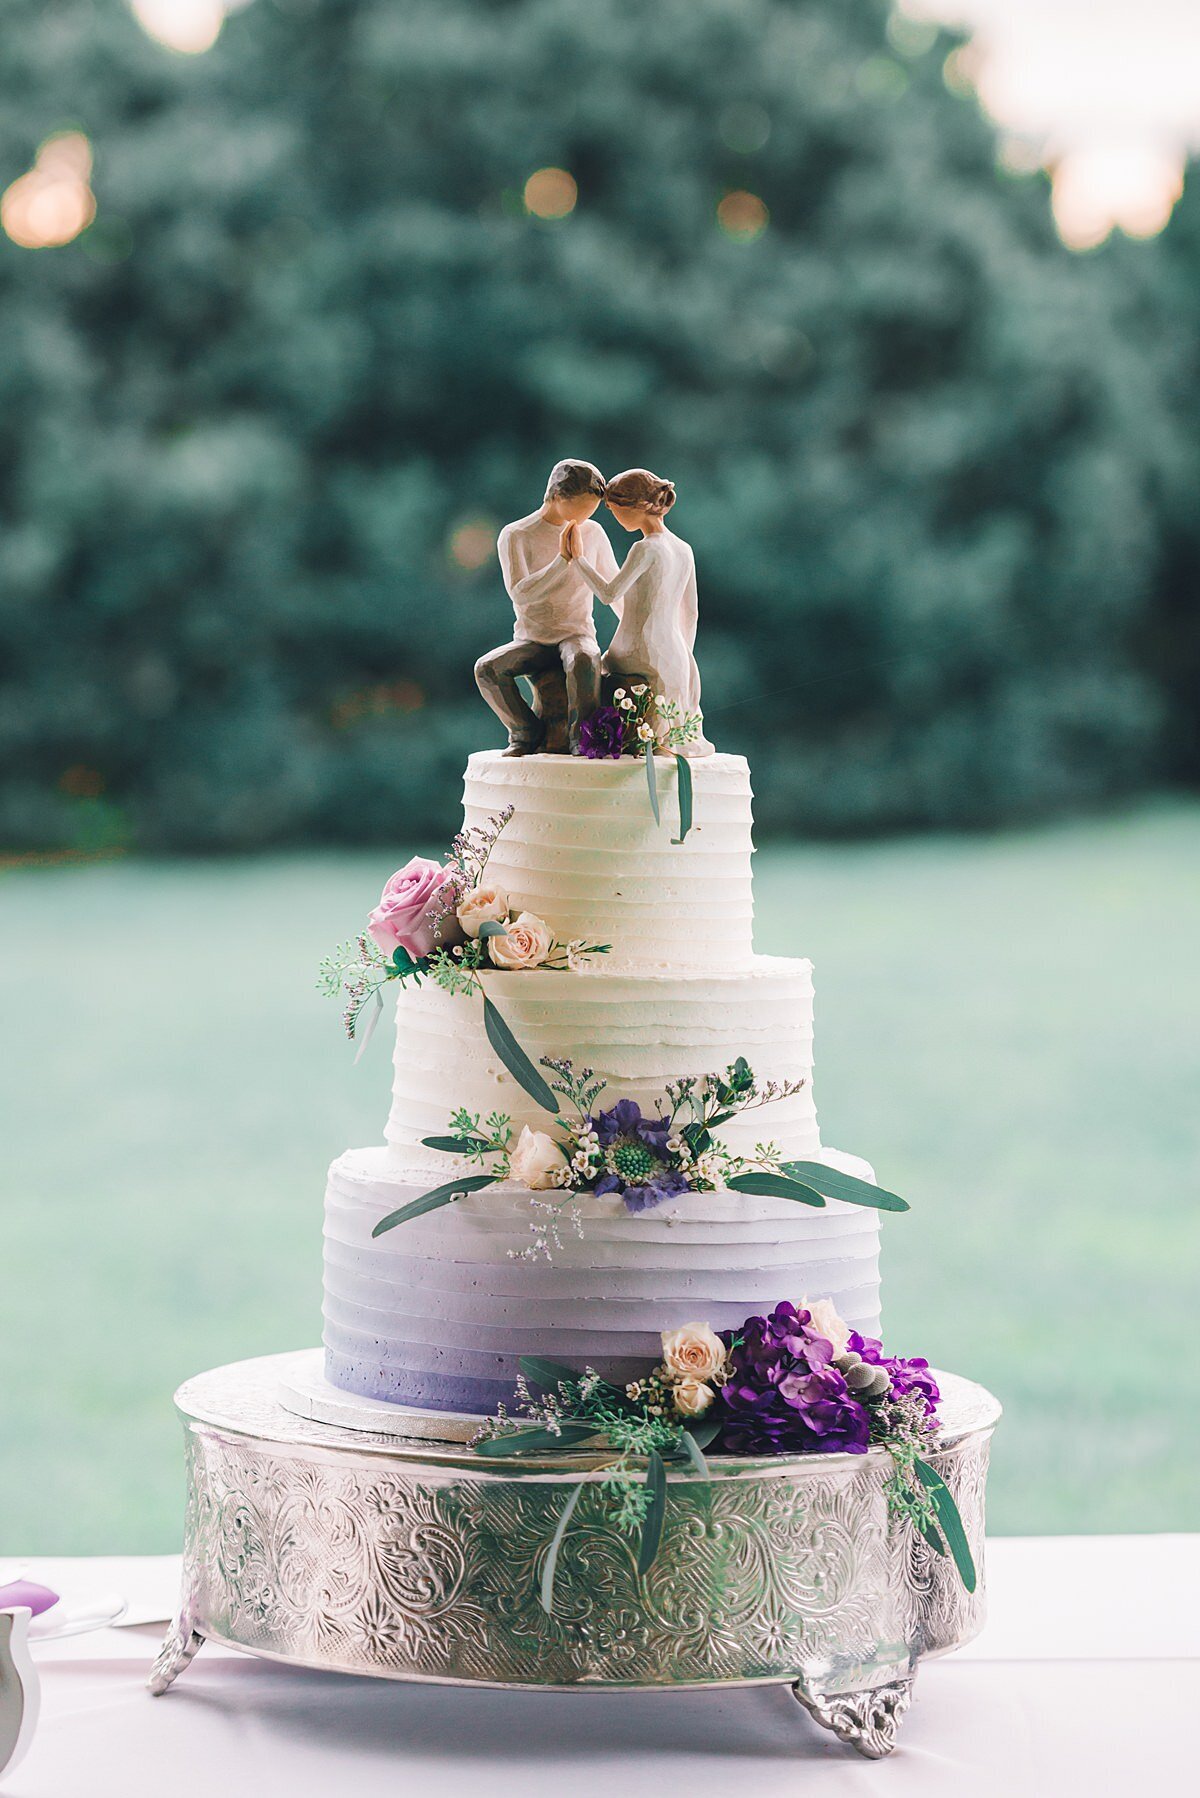 Ombre three tiered wedding cake with pink and purple flowers sitting on a silver cake stand topped with a bride and groom topper